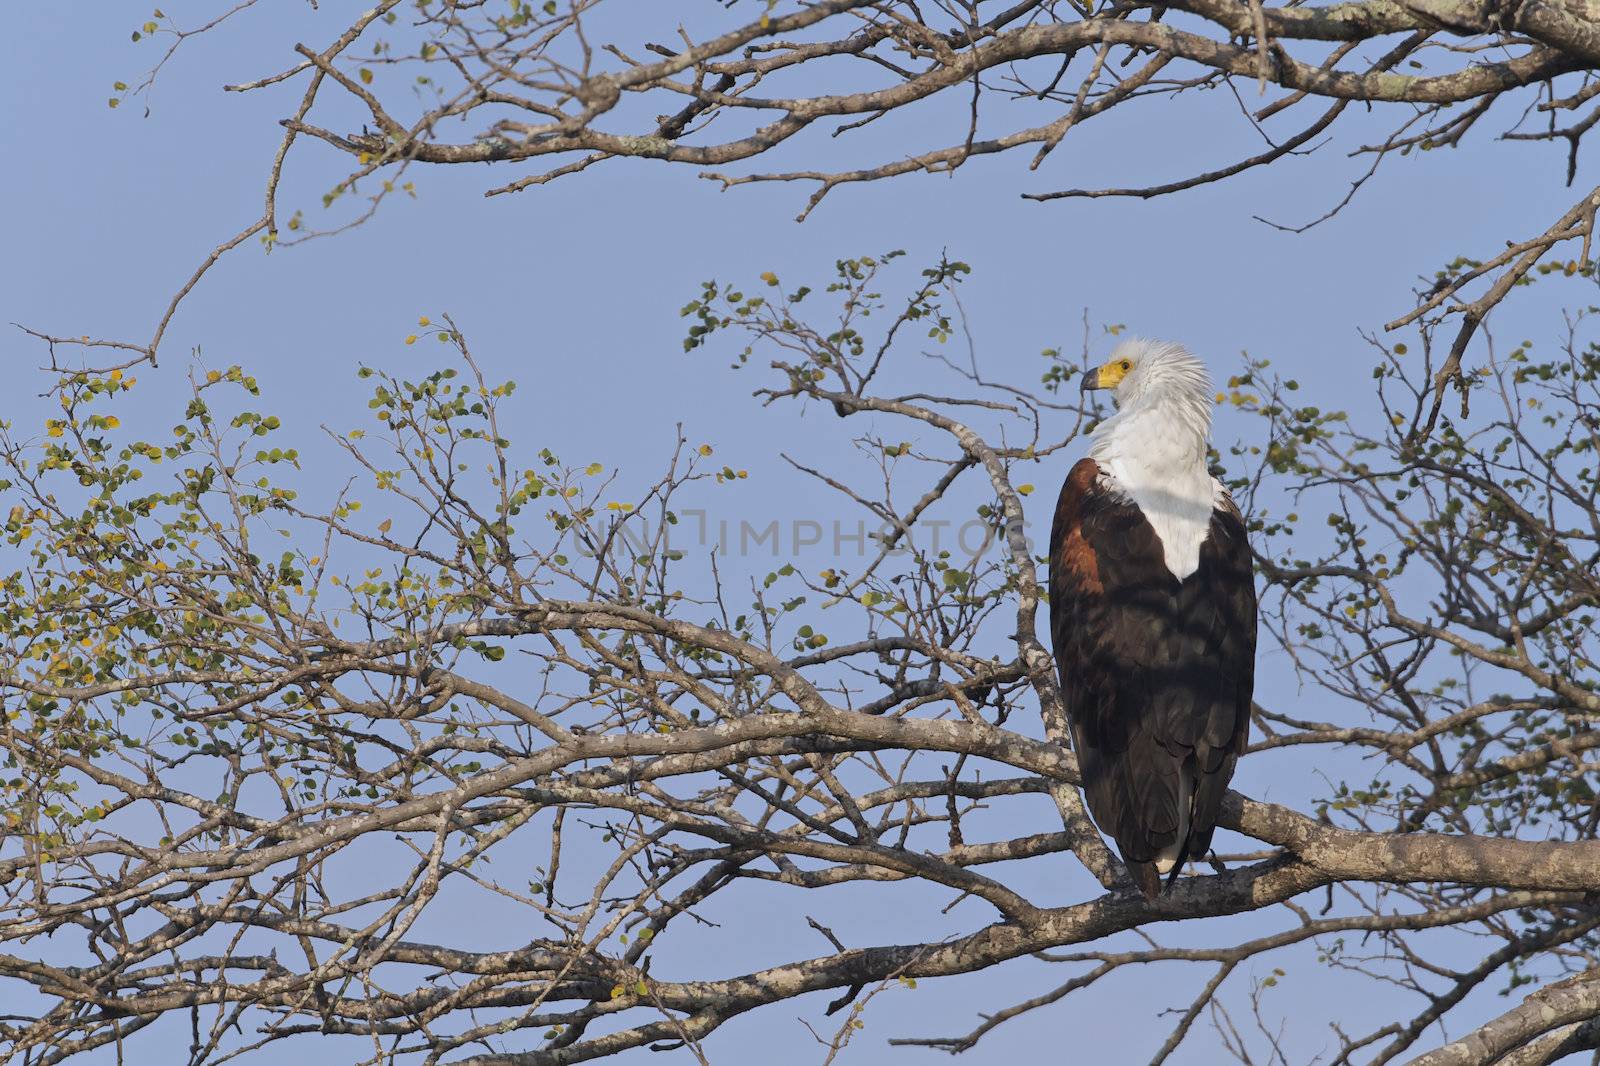 African Fish Eagle, Haliaeetus vocifer in a tree in the Kruger National Park, game reserve, South Africa